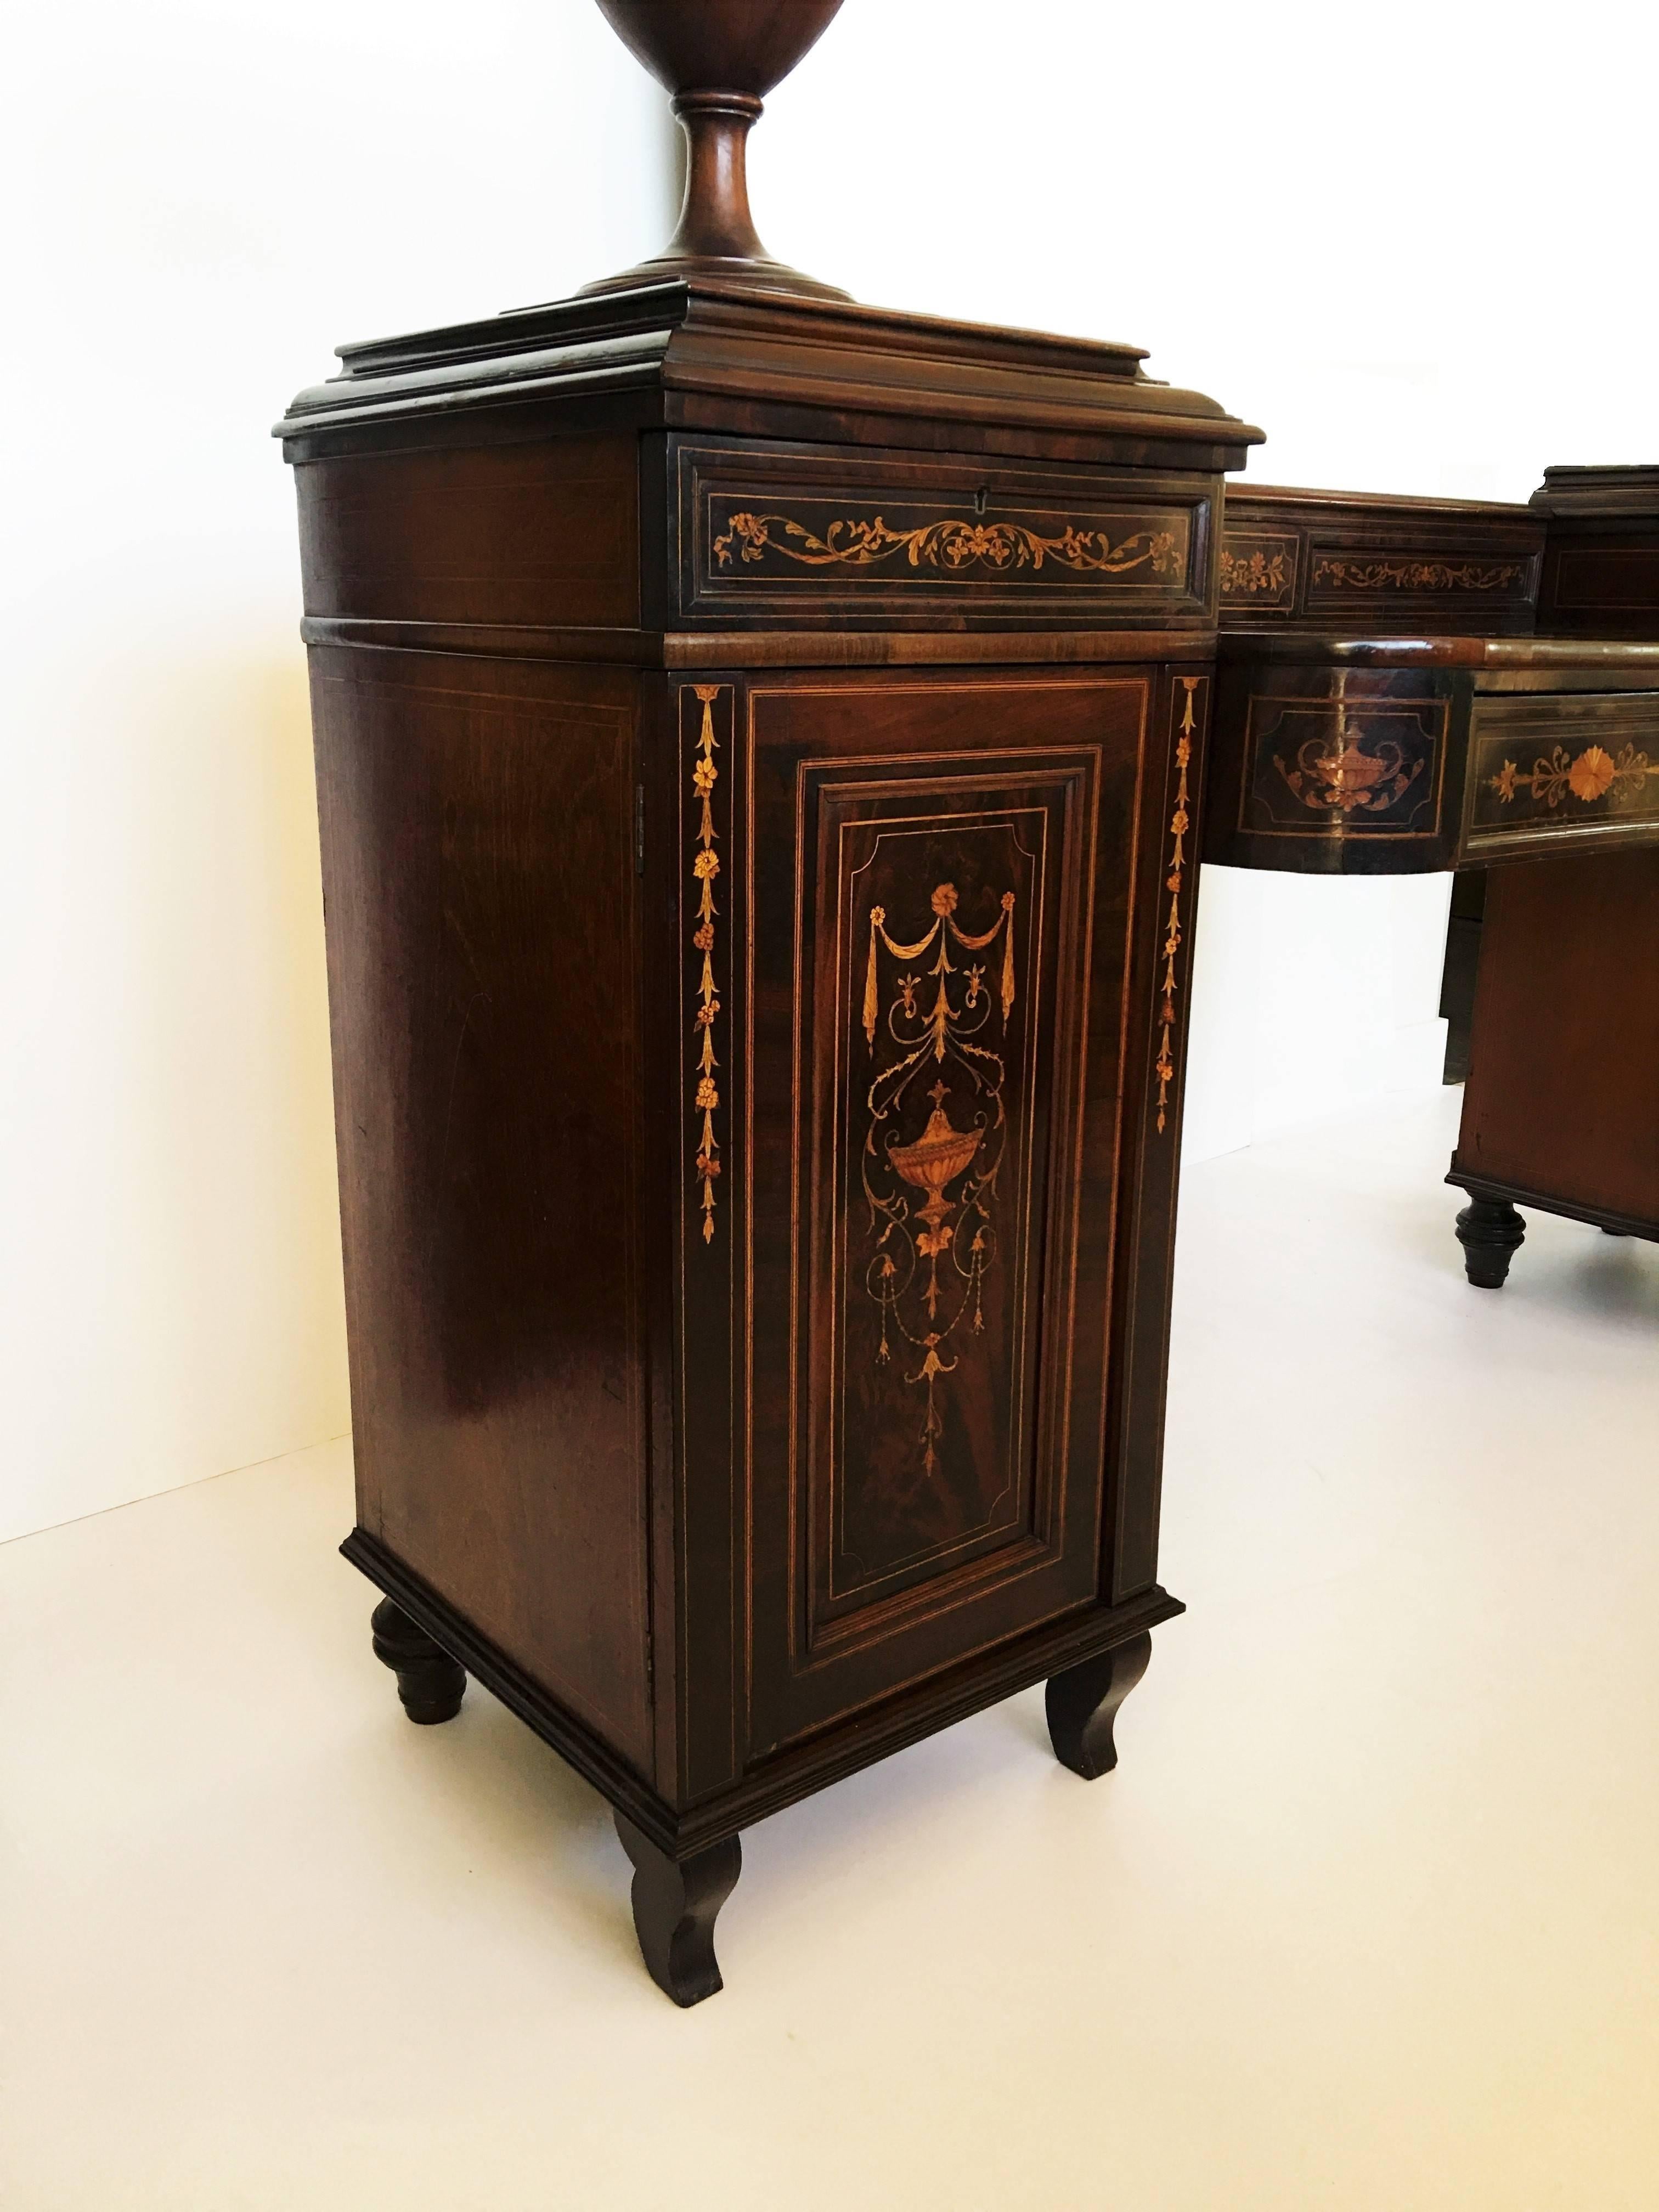 Early 19th Century Regency Marquetry Inlaid Rosewood Pedestal Sideboard with Urn For Sale 3